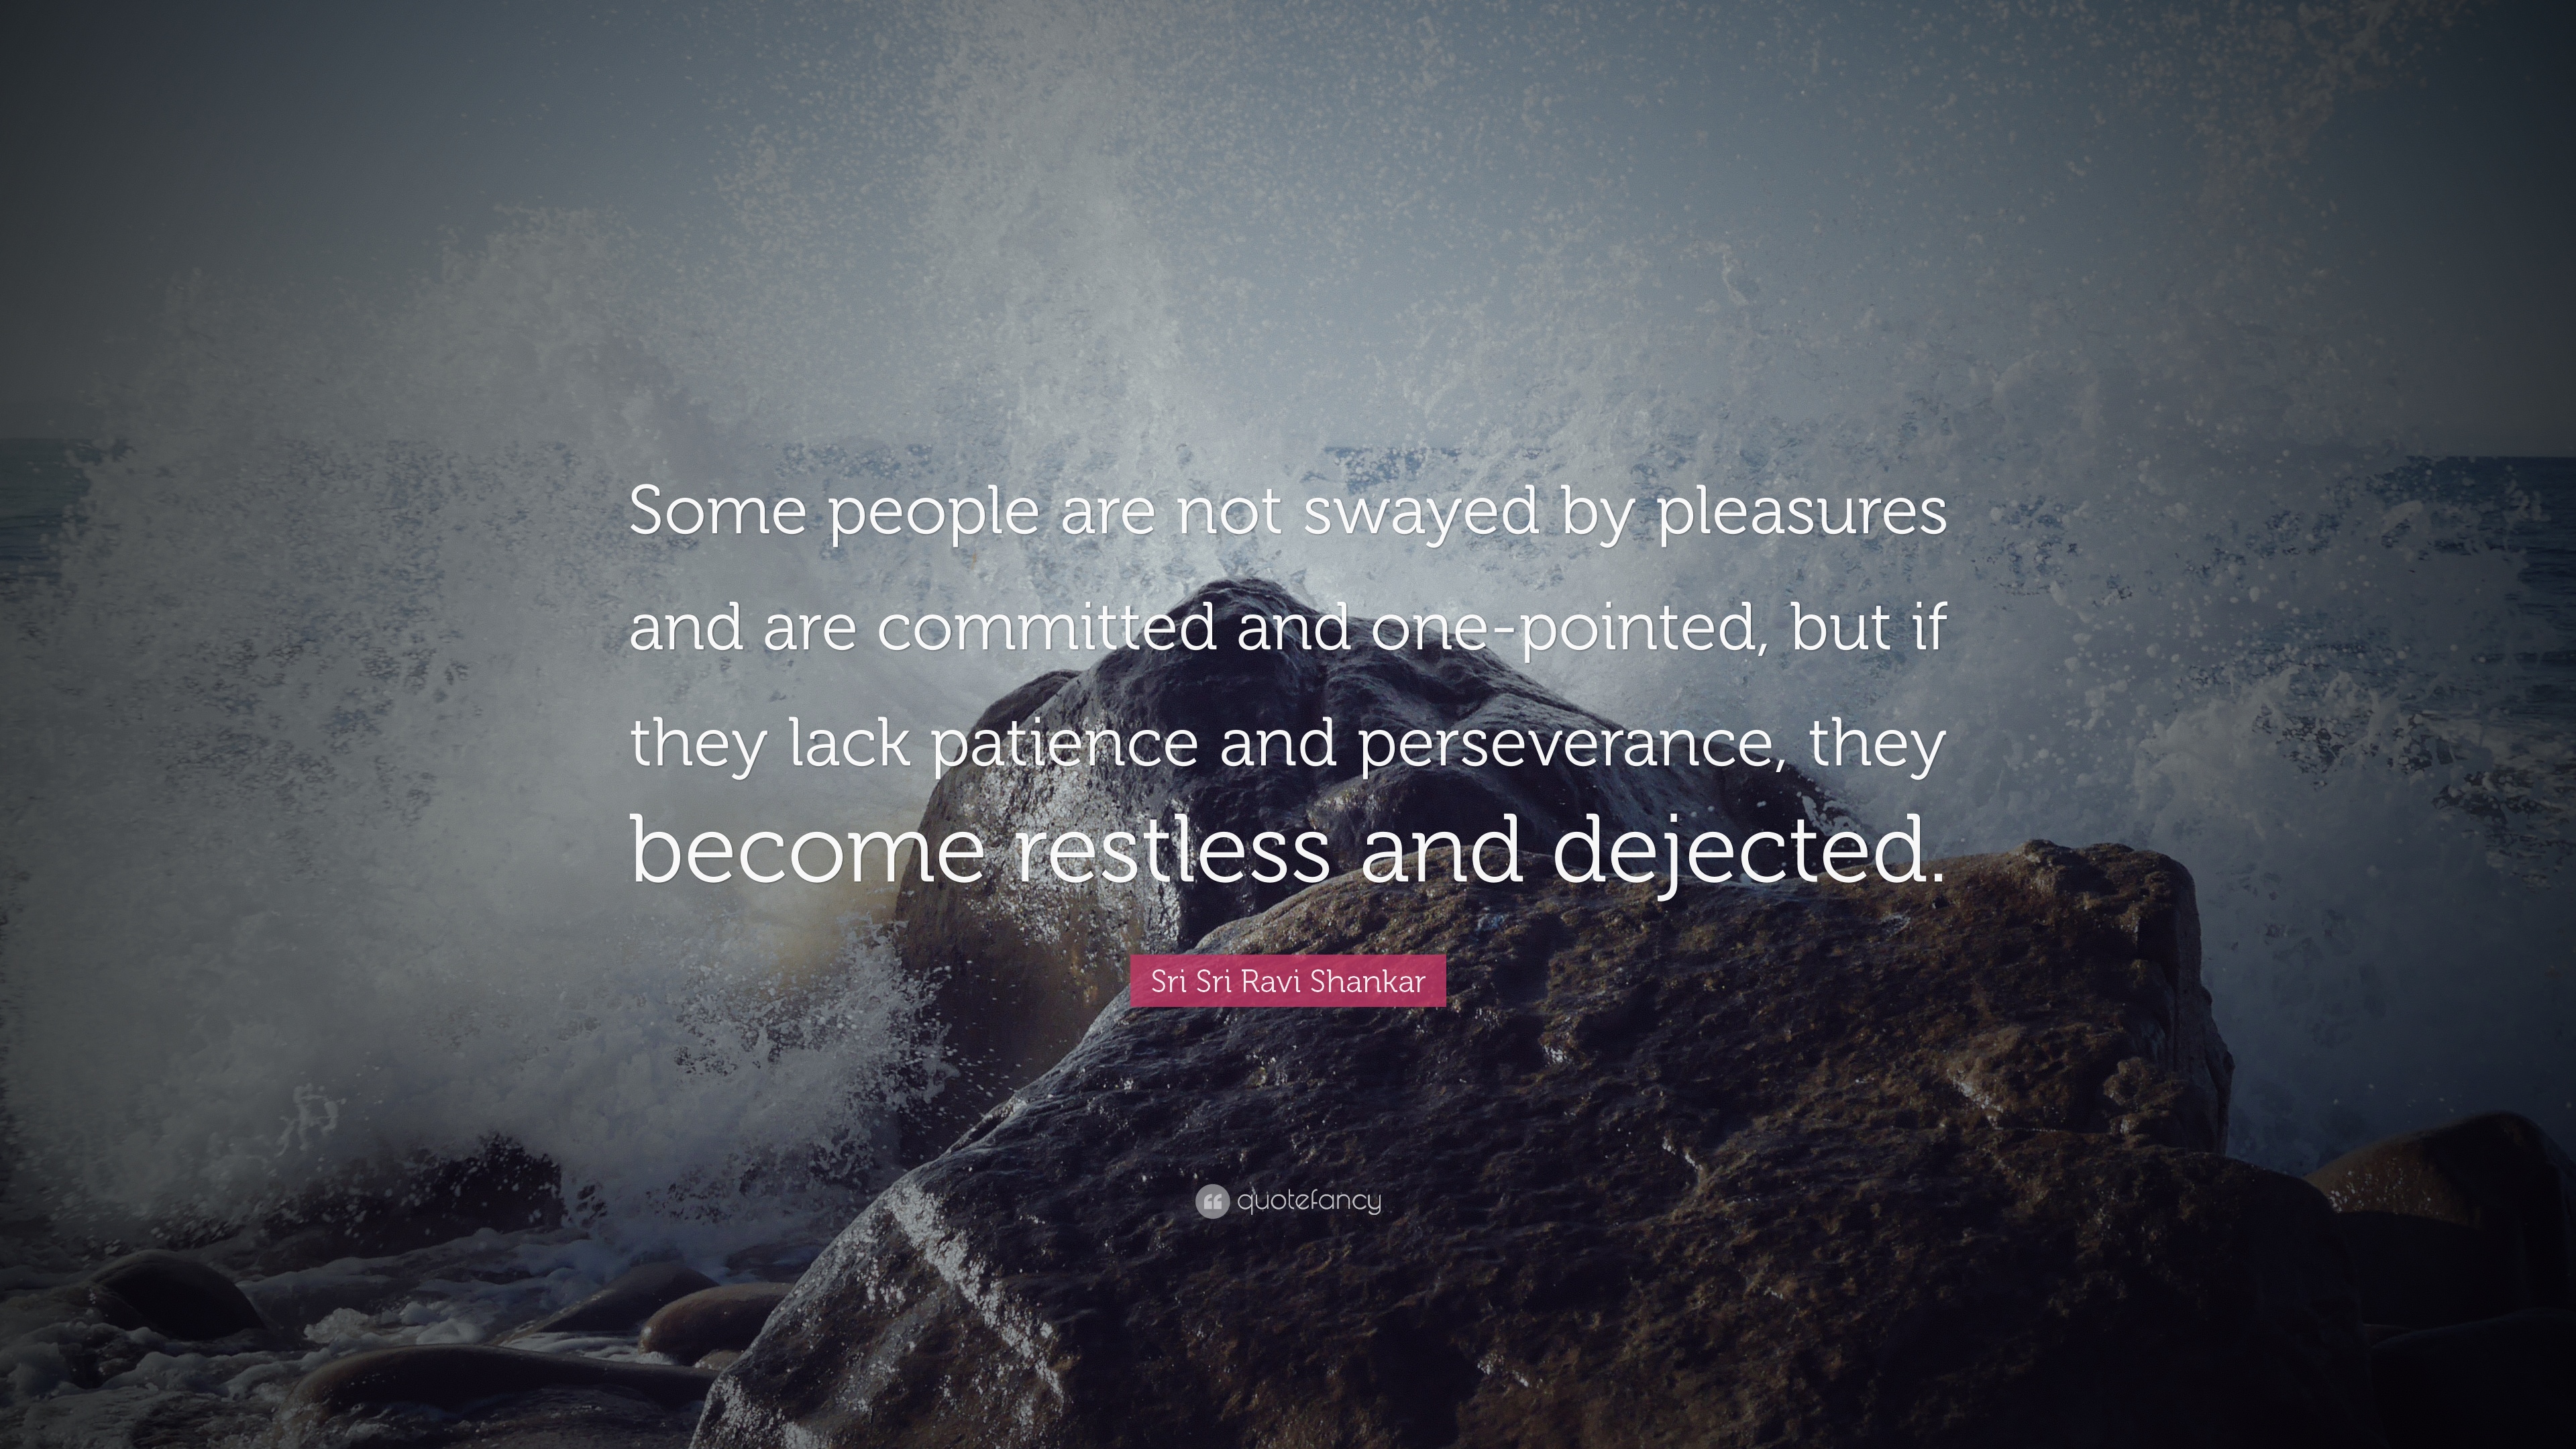 Sri Sri Ravi Shankar Quote: “Some people are not swayed by ...